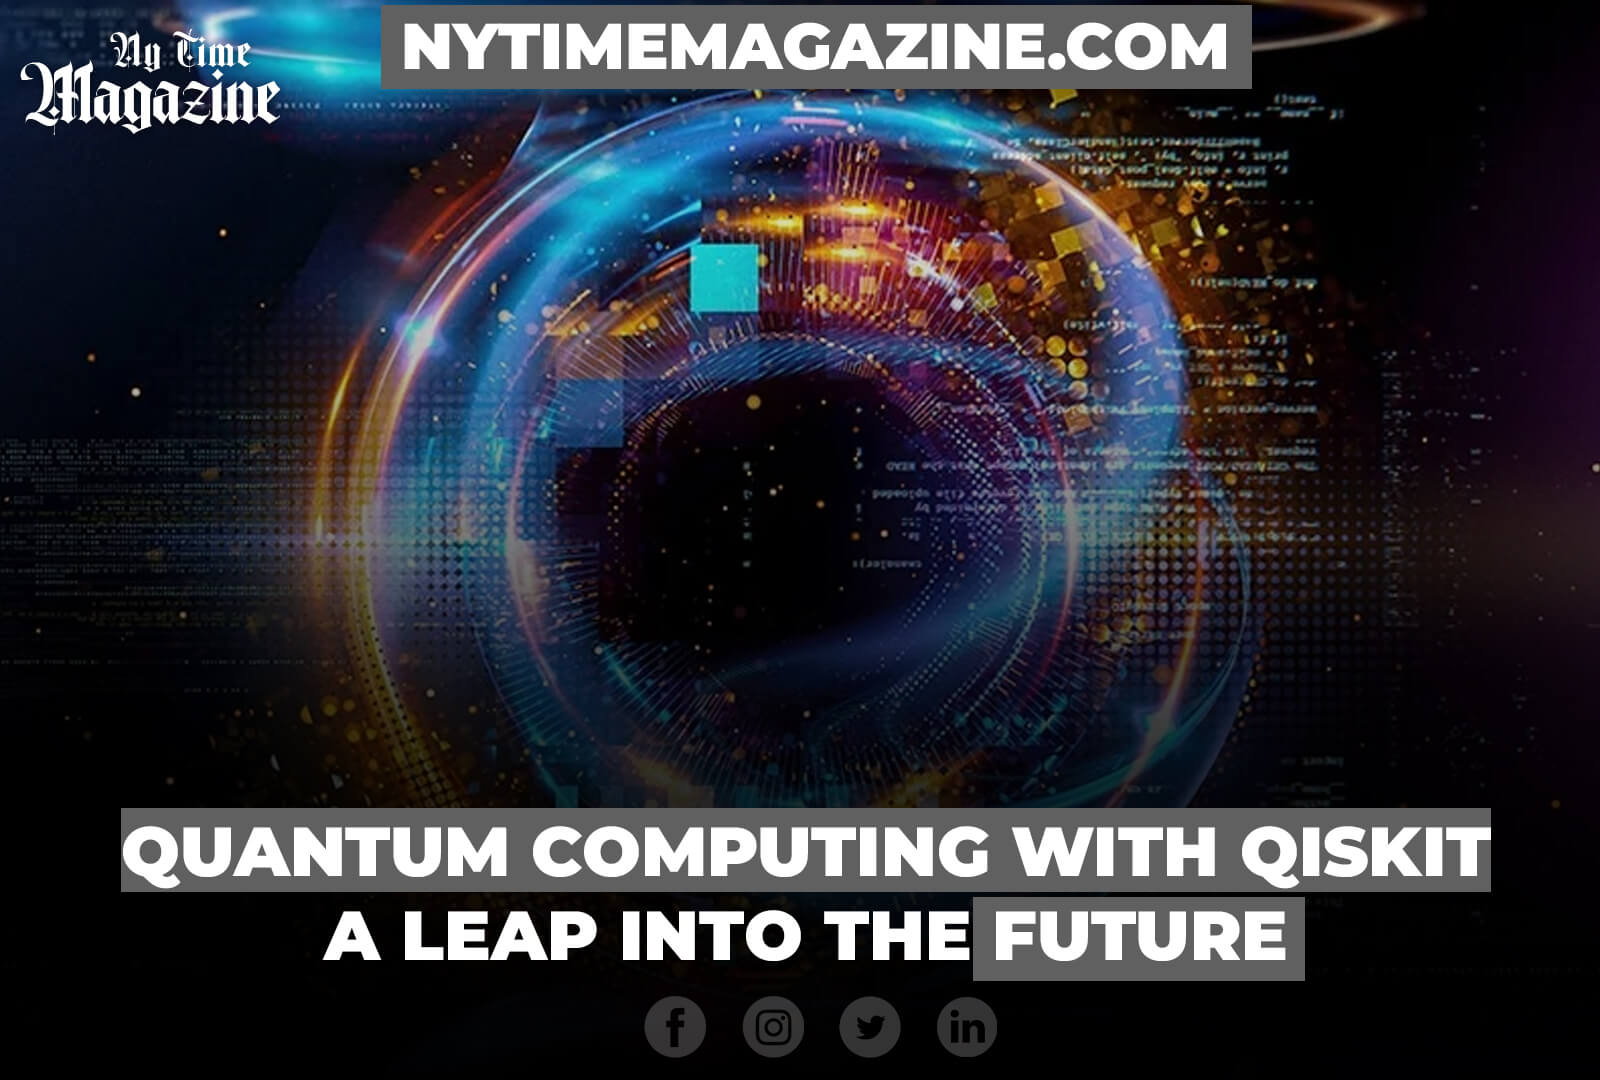 QUANTUM COMPUTING WITH QISKIT: A LEAP INTO THE FUTURE